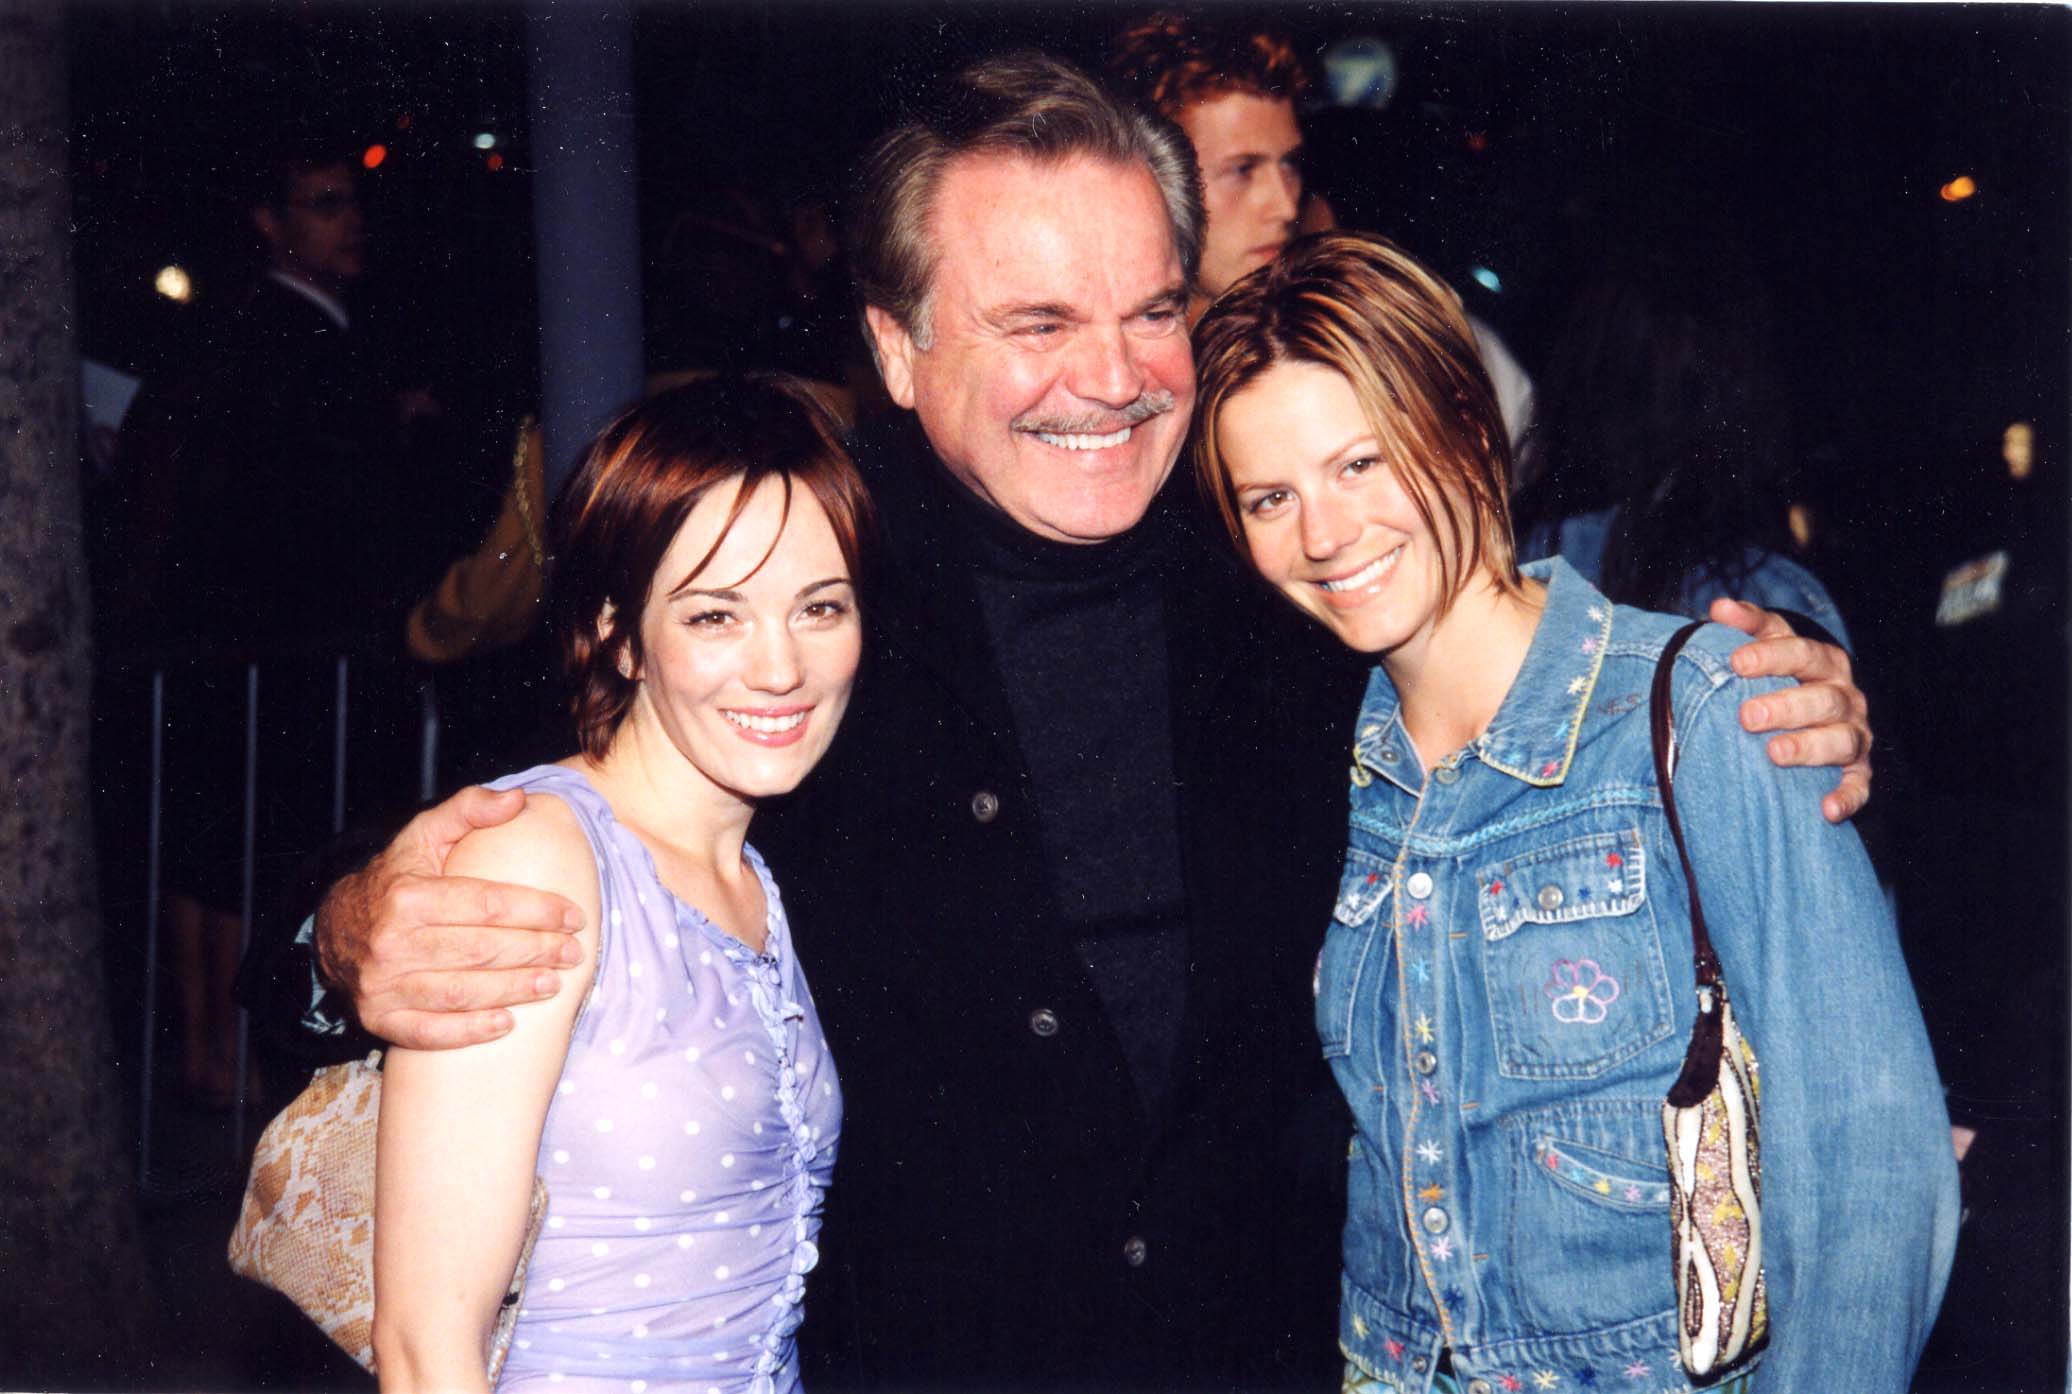 Natasha Gregson Wagner, Robert Wagner and Courtney Brooke Wagner during the "High Fidelity" premiere on March 28, 2000 ┃Source: Getty Images